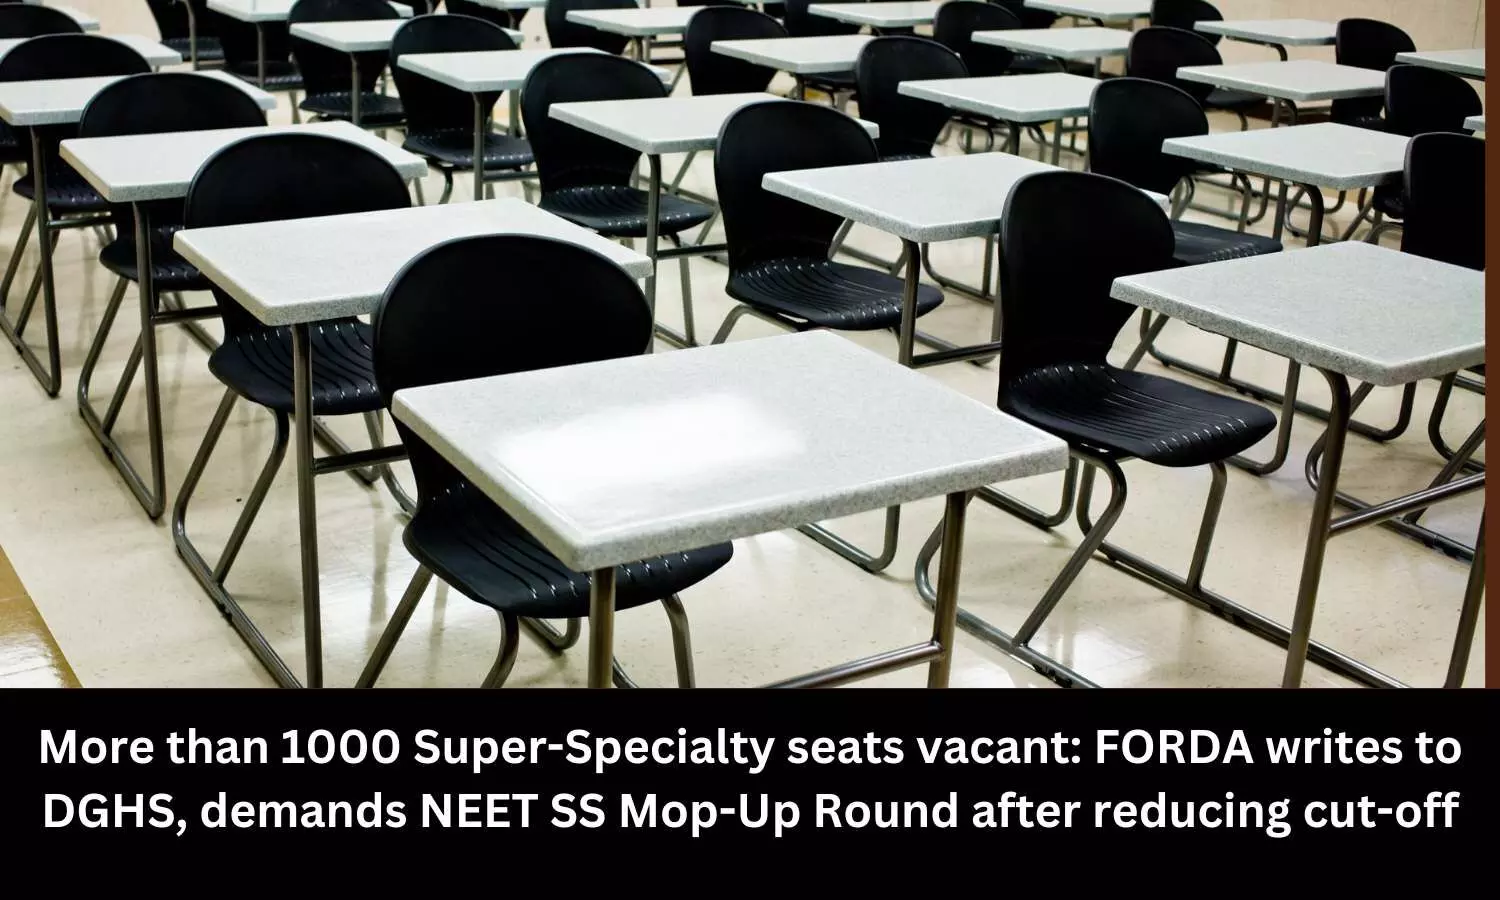 Over 1000 super-specialty seats vacant, FORDA demands NEET SS mop-up round after reducing cut-off